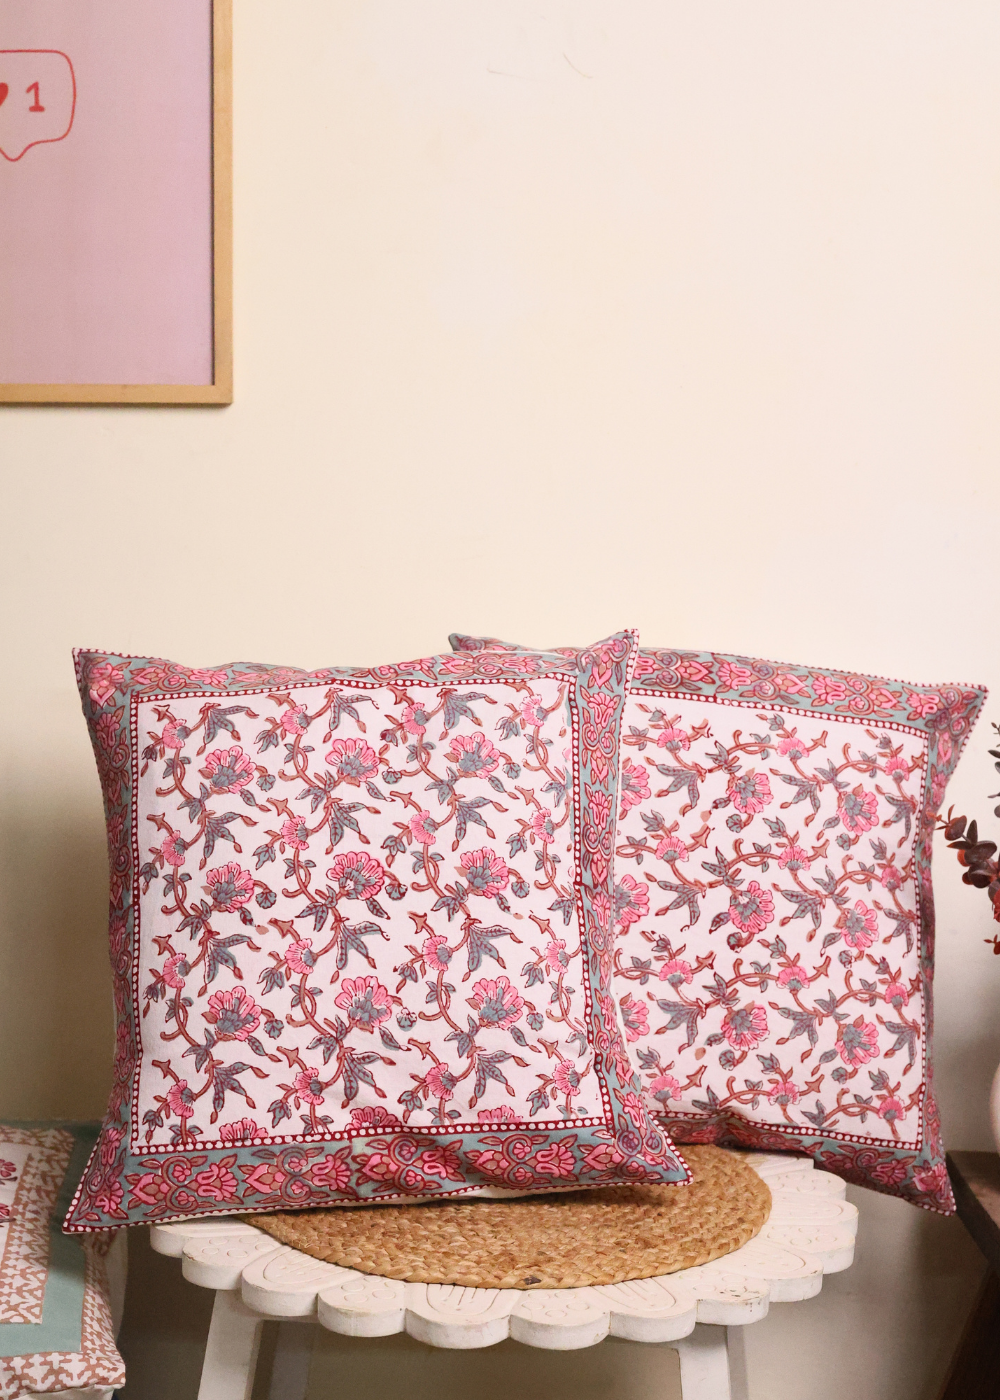 Pastel Dream Cushion Cover - set of 2